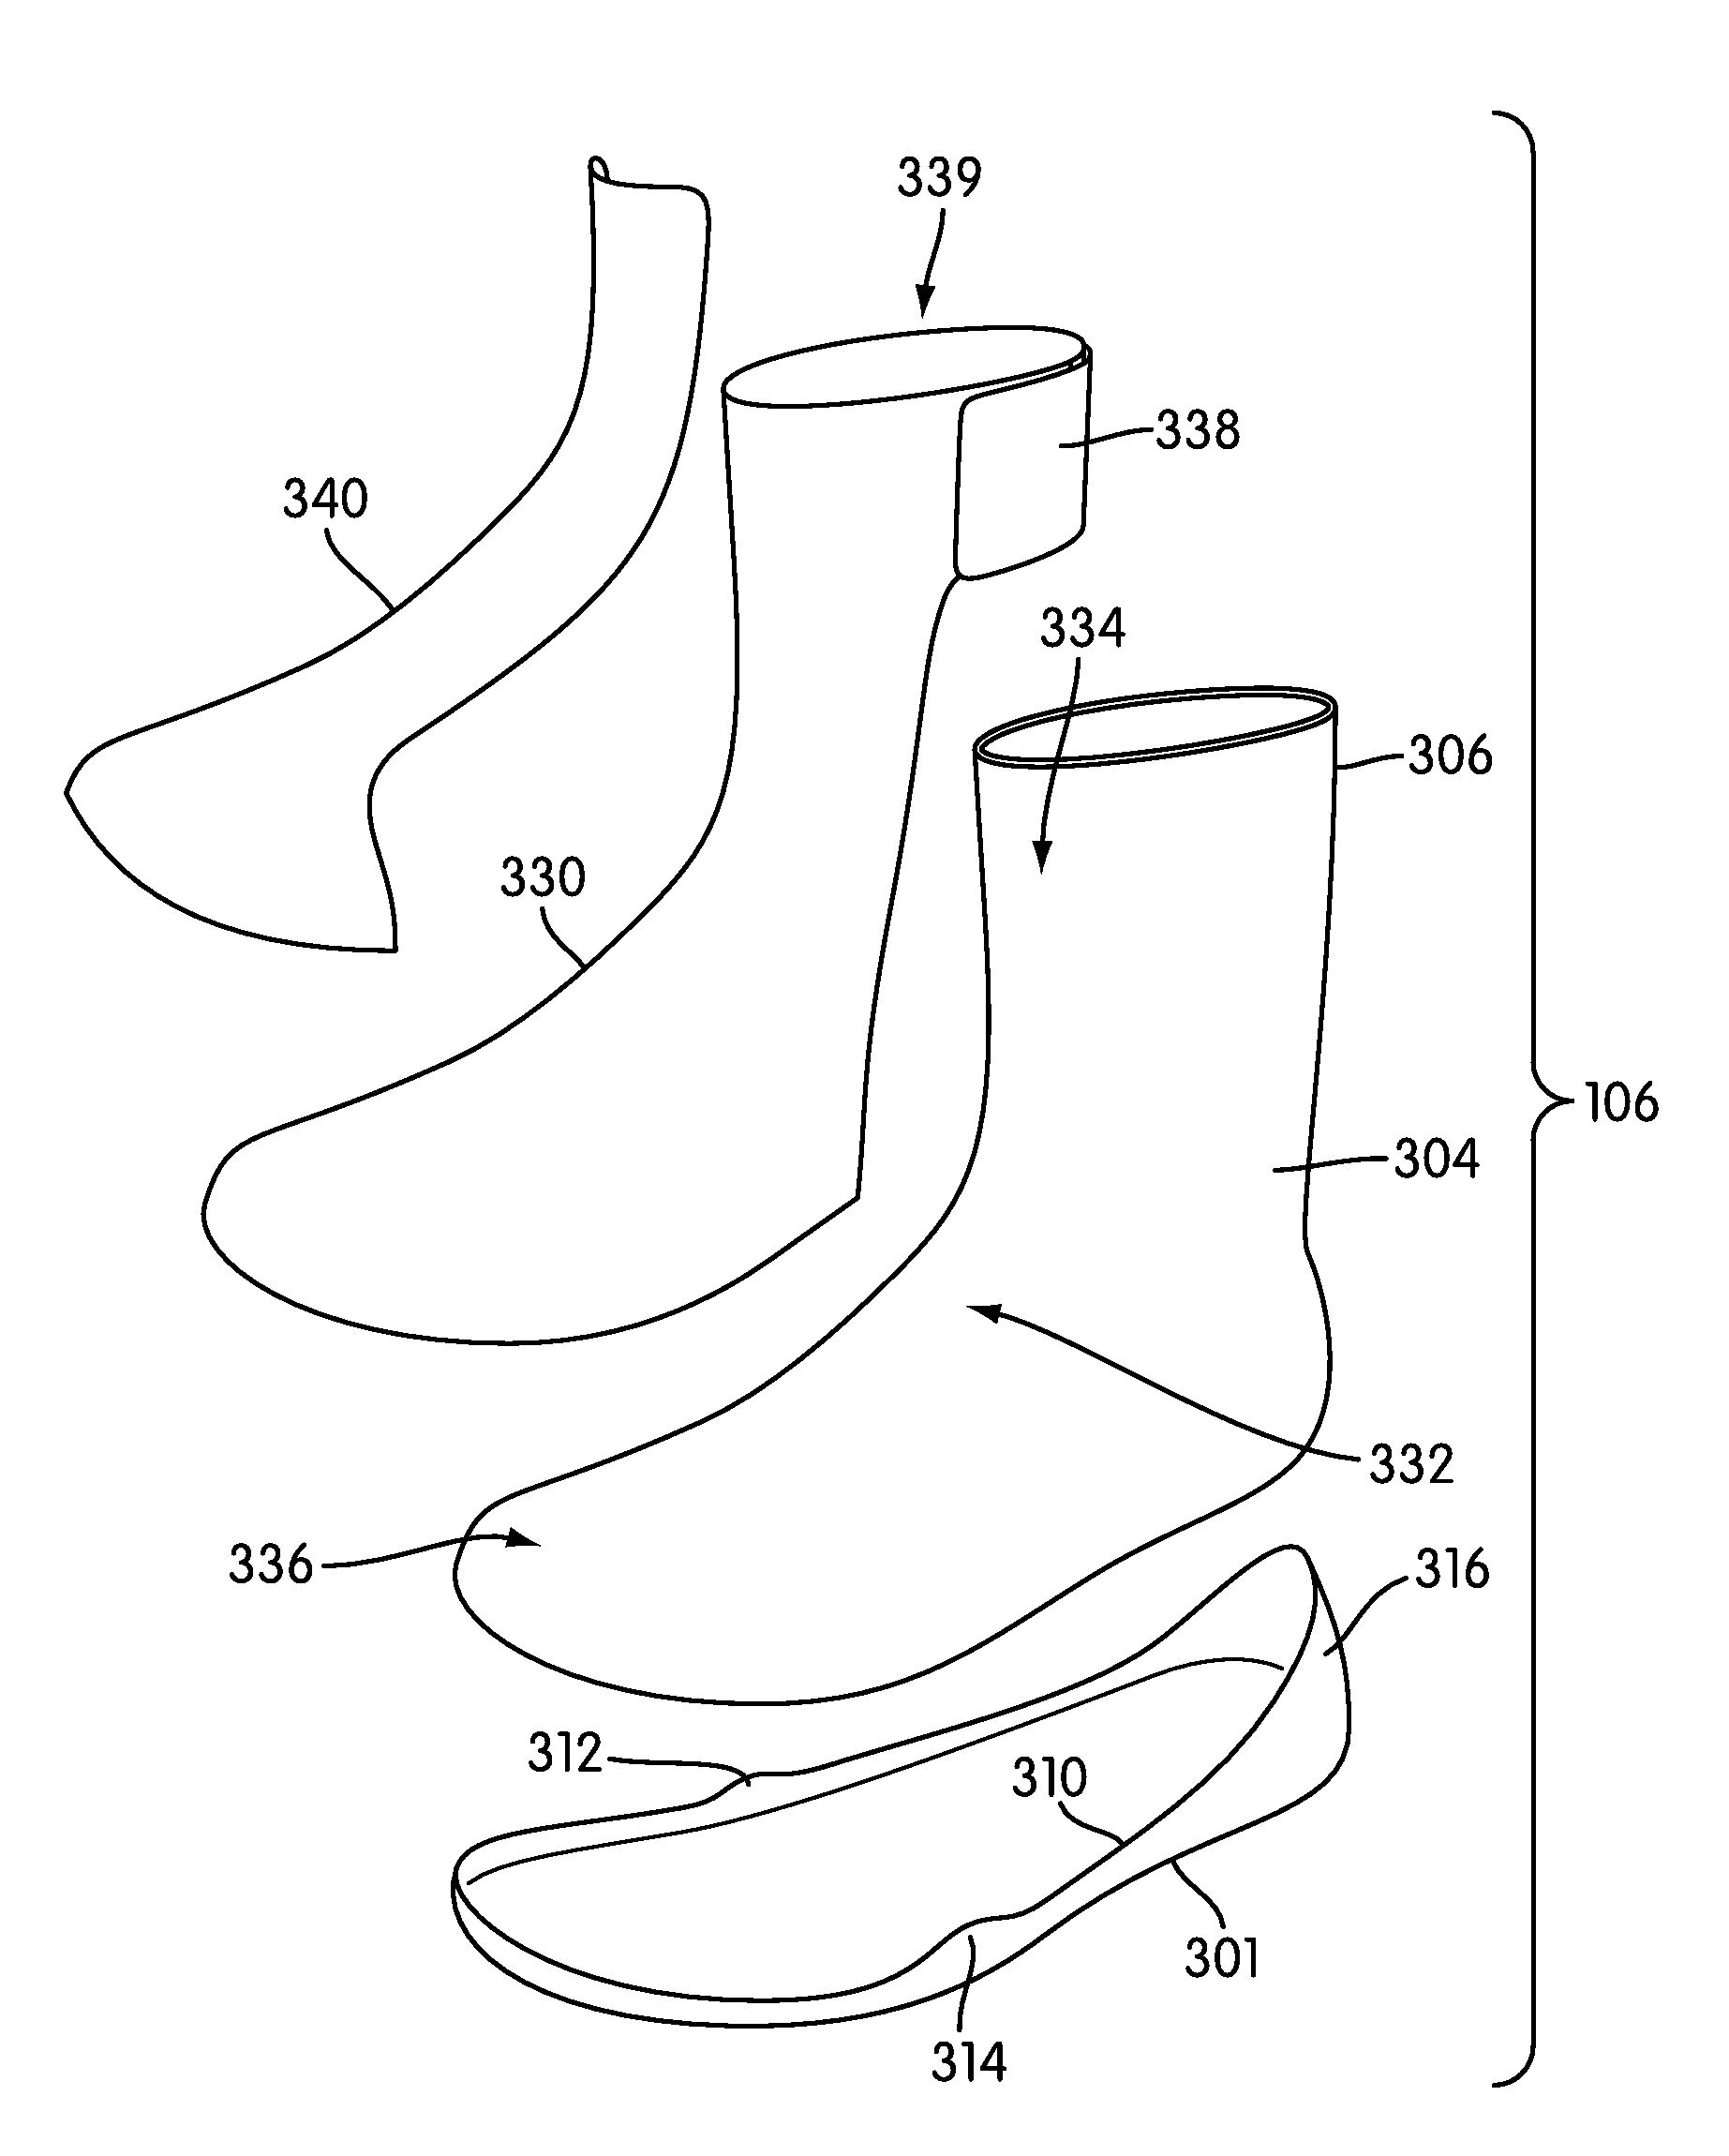 Article of footwear for sailing